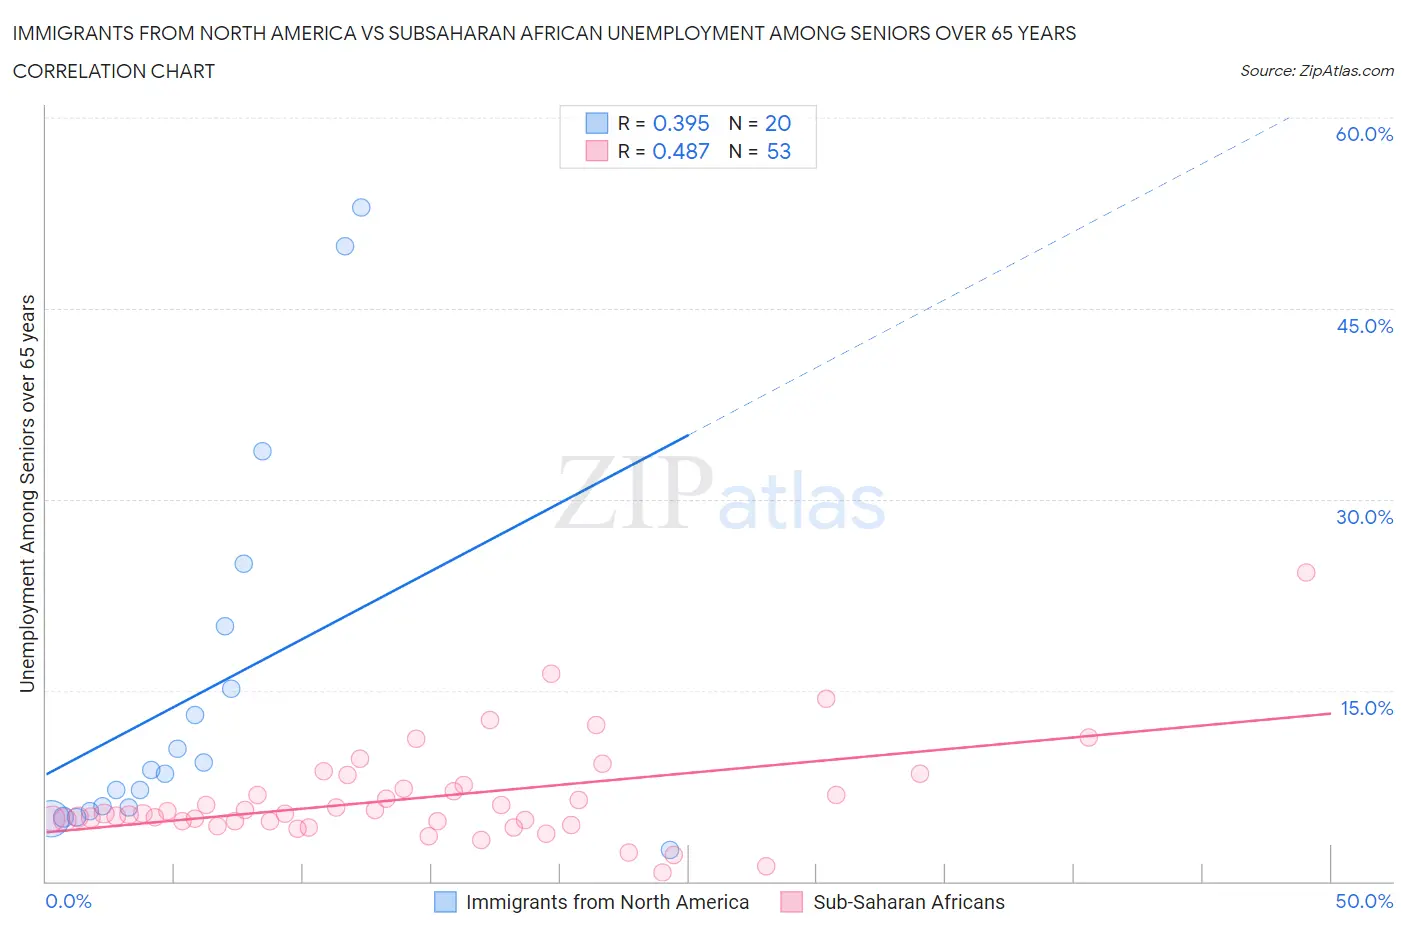 Immigrants from North America vs Subsaharan African Unemployment Among Seniors over 65 years